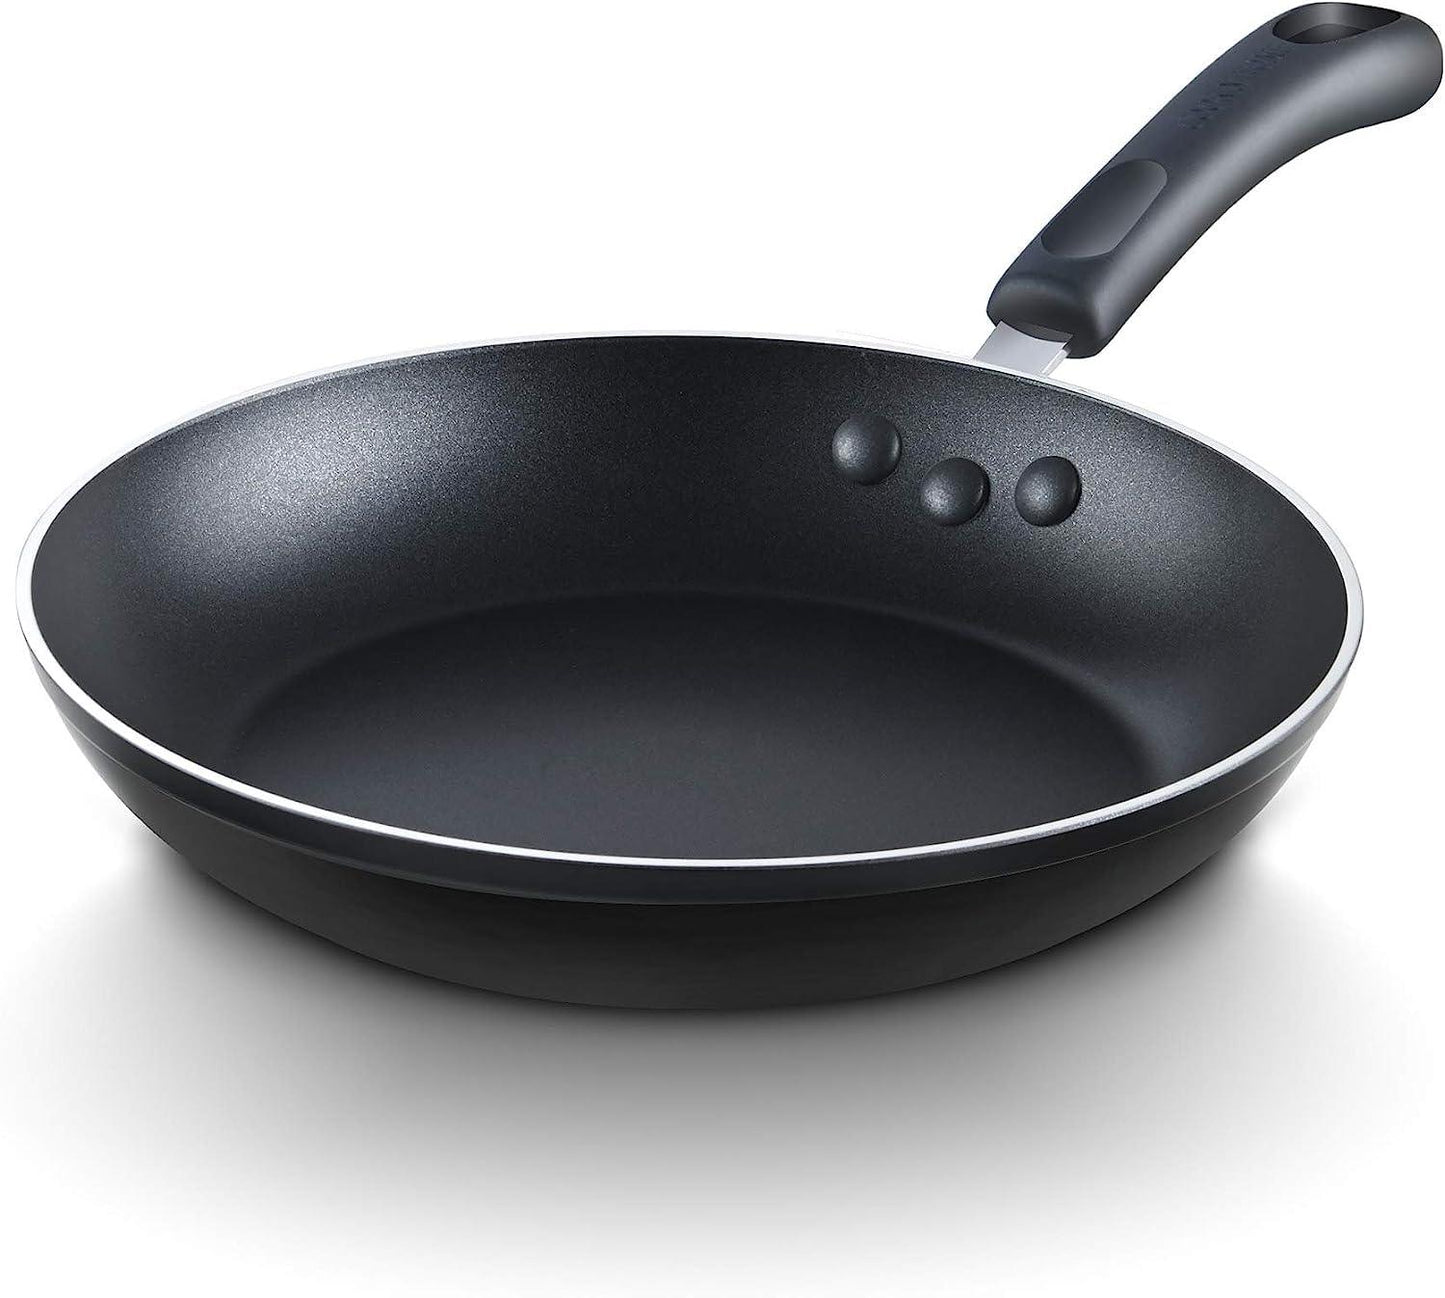 Cook N Home Basics Nonstick Saute Skillet Fry Pan 3-Piece Set, 8 inch/9.5-Inch/11-inch Non-Stick Frying Pans, Black - CookCave